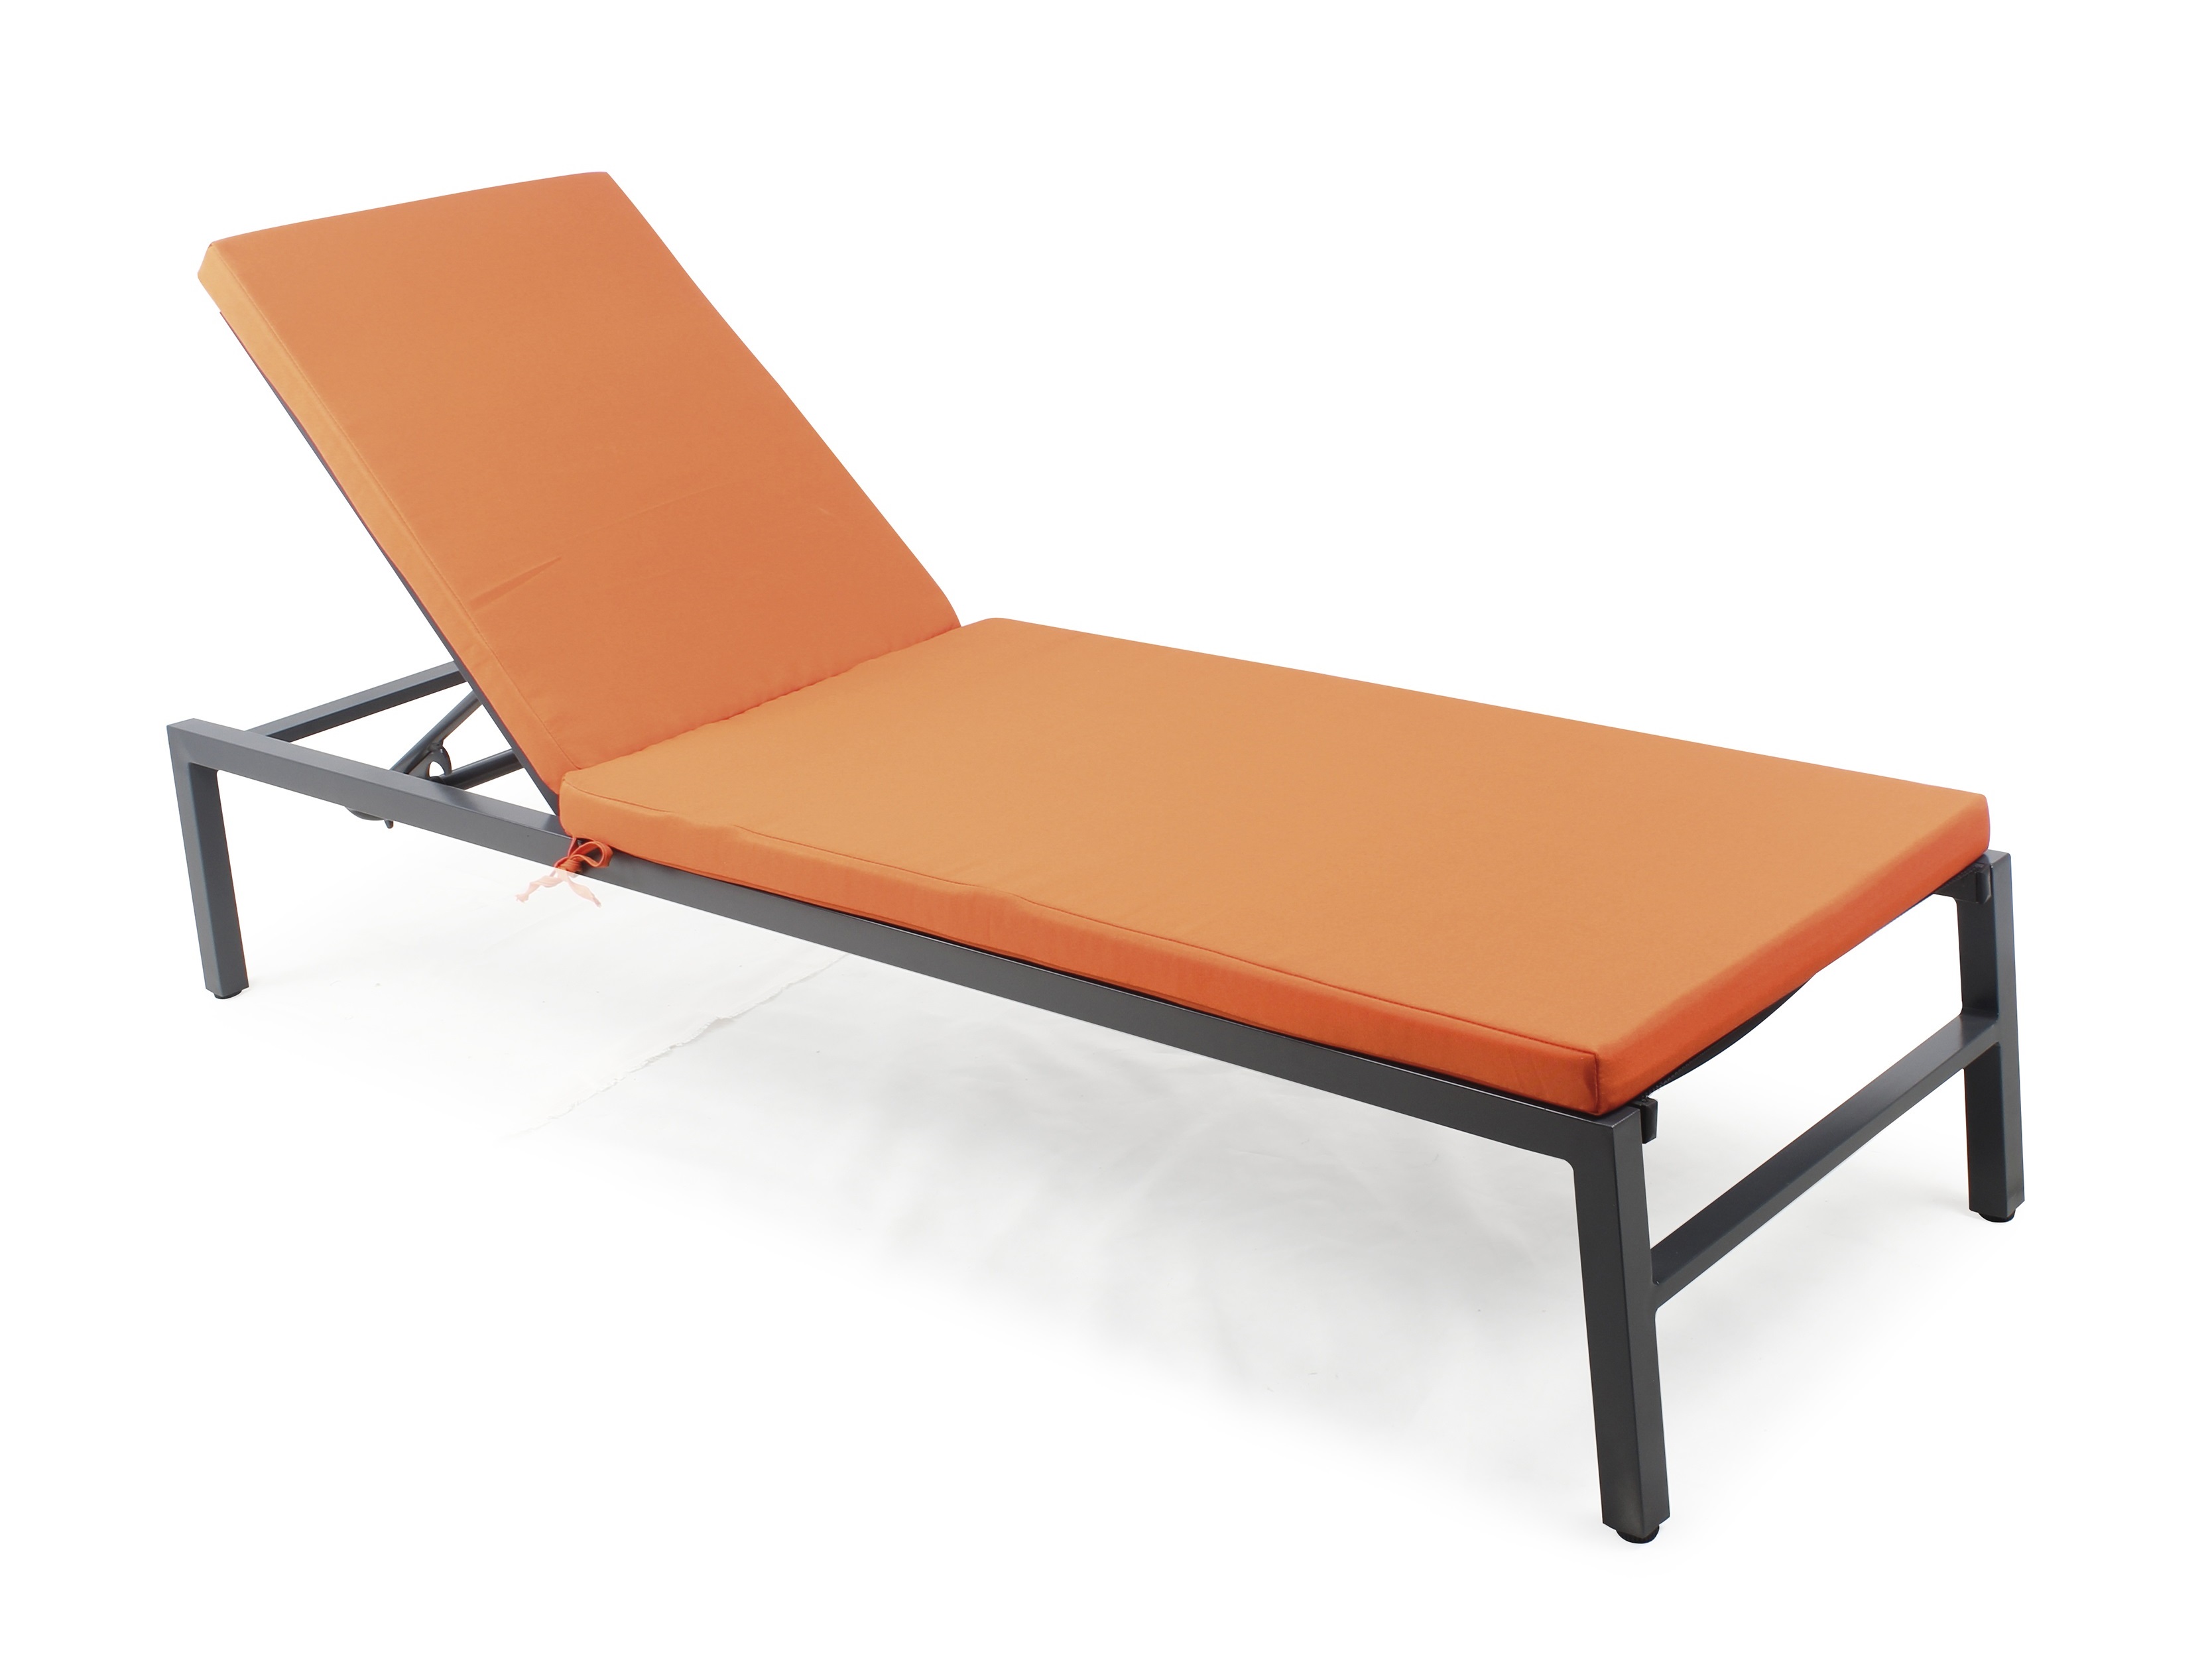 Patio aluminum chaise lounge chair with cushion